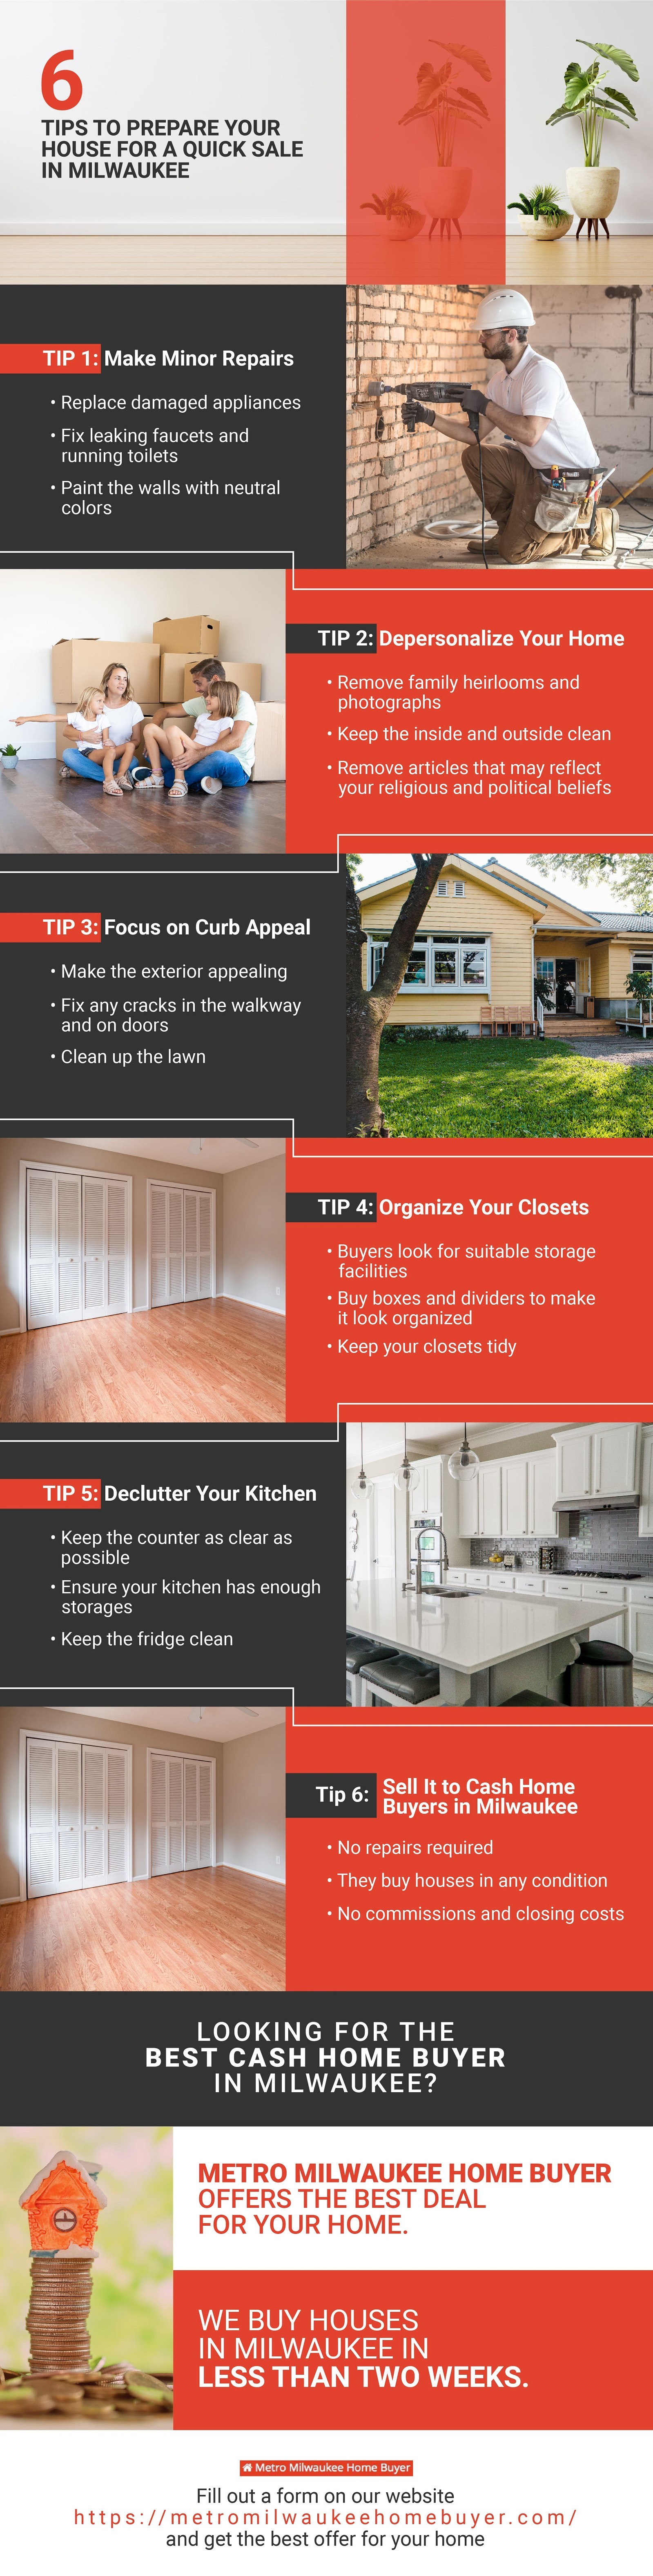 Tips to Prepare Your House for a Quick Sale